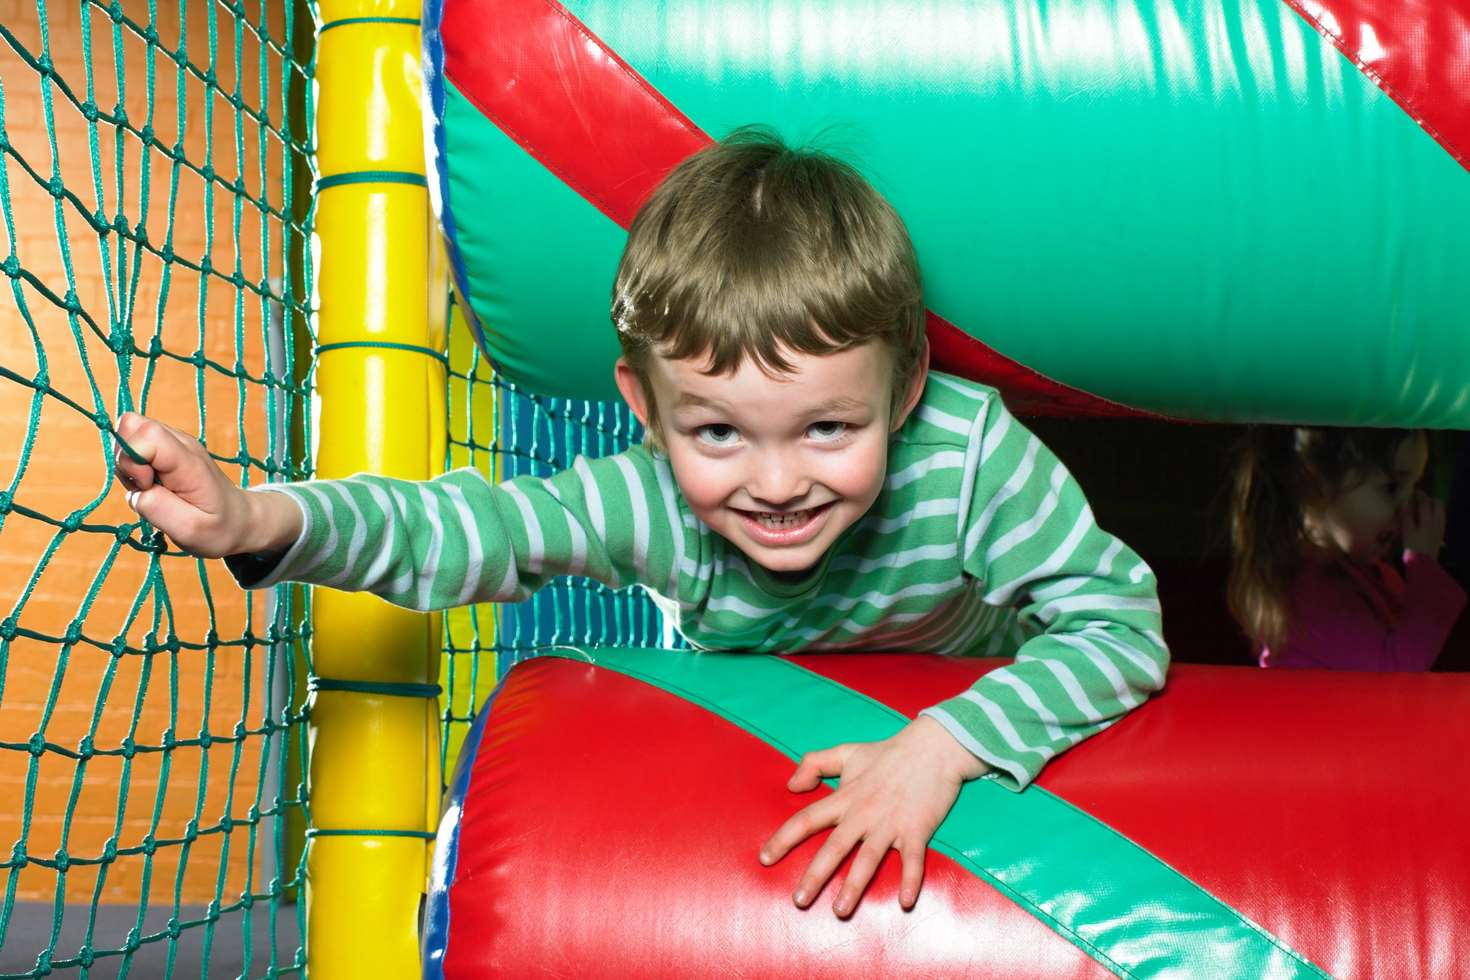 If you're looking for a party with minimal workload, soft play could be the answer